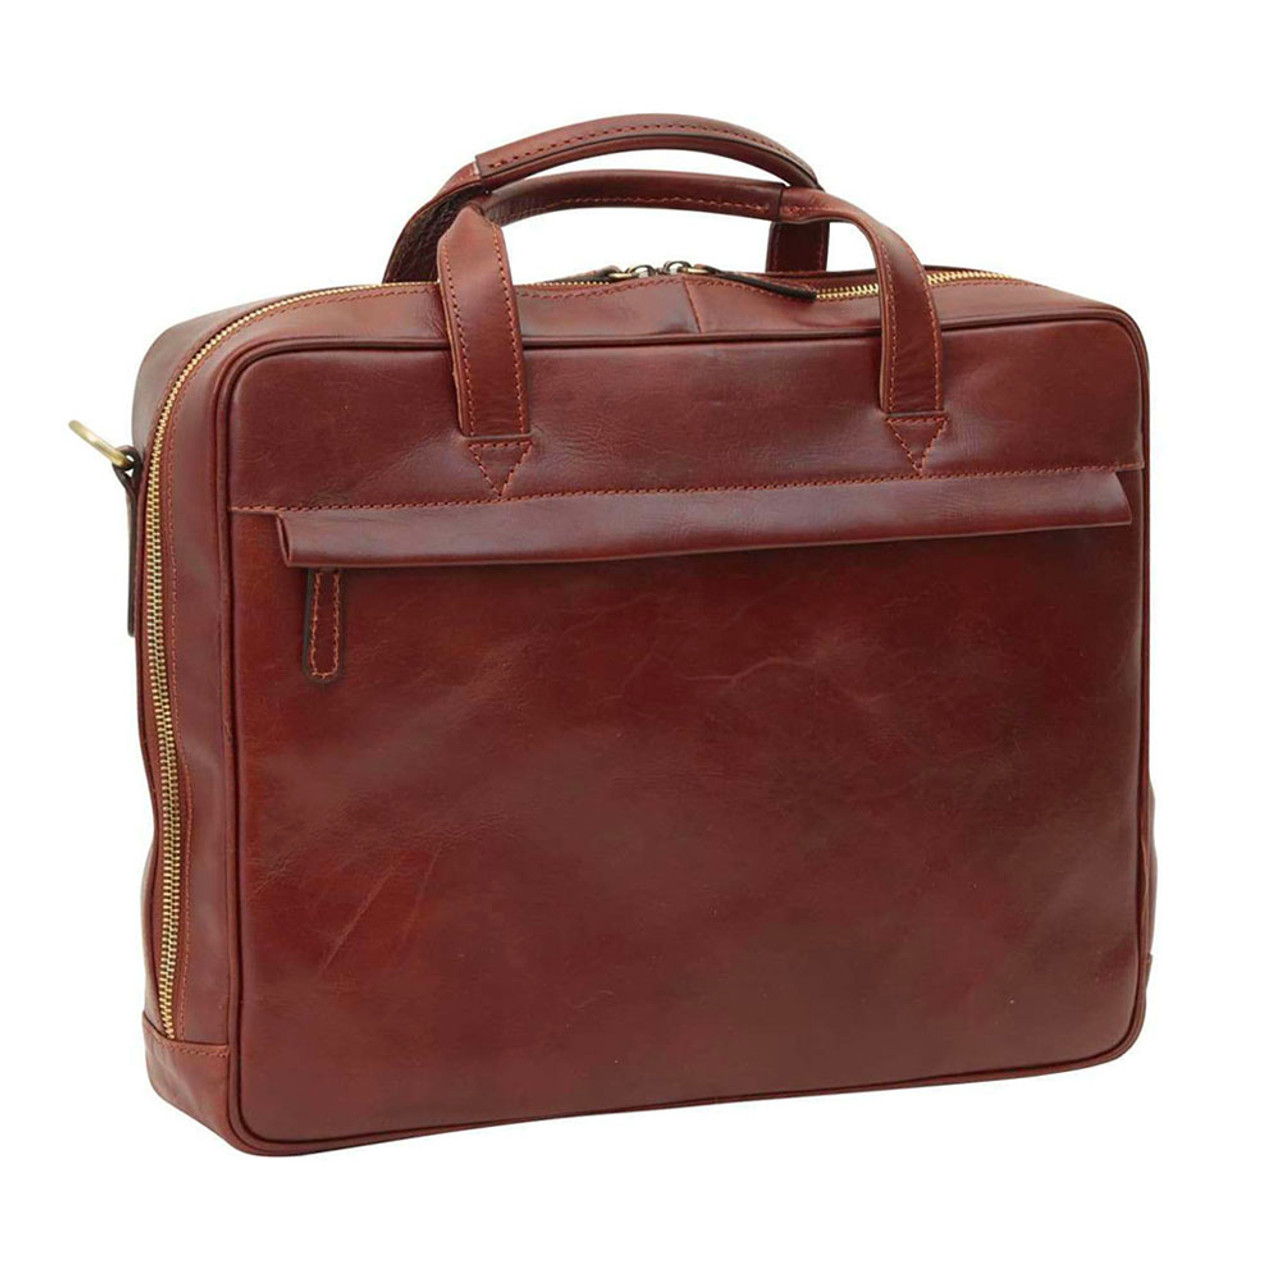 Old Angler Classic Leather Laptop Bag